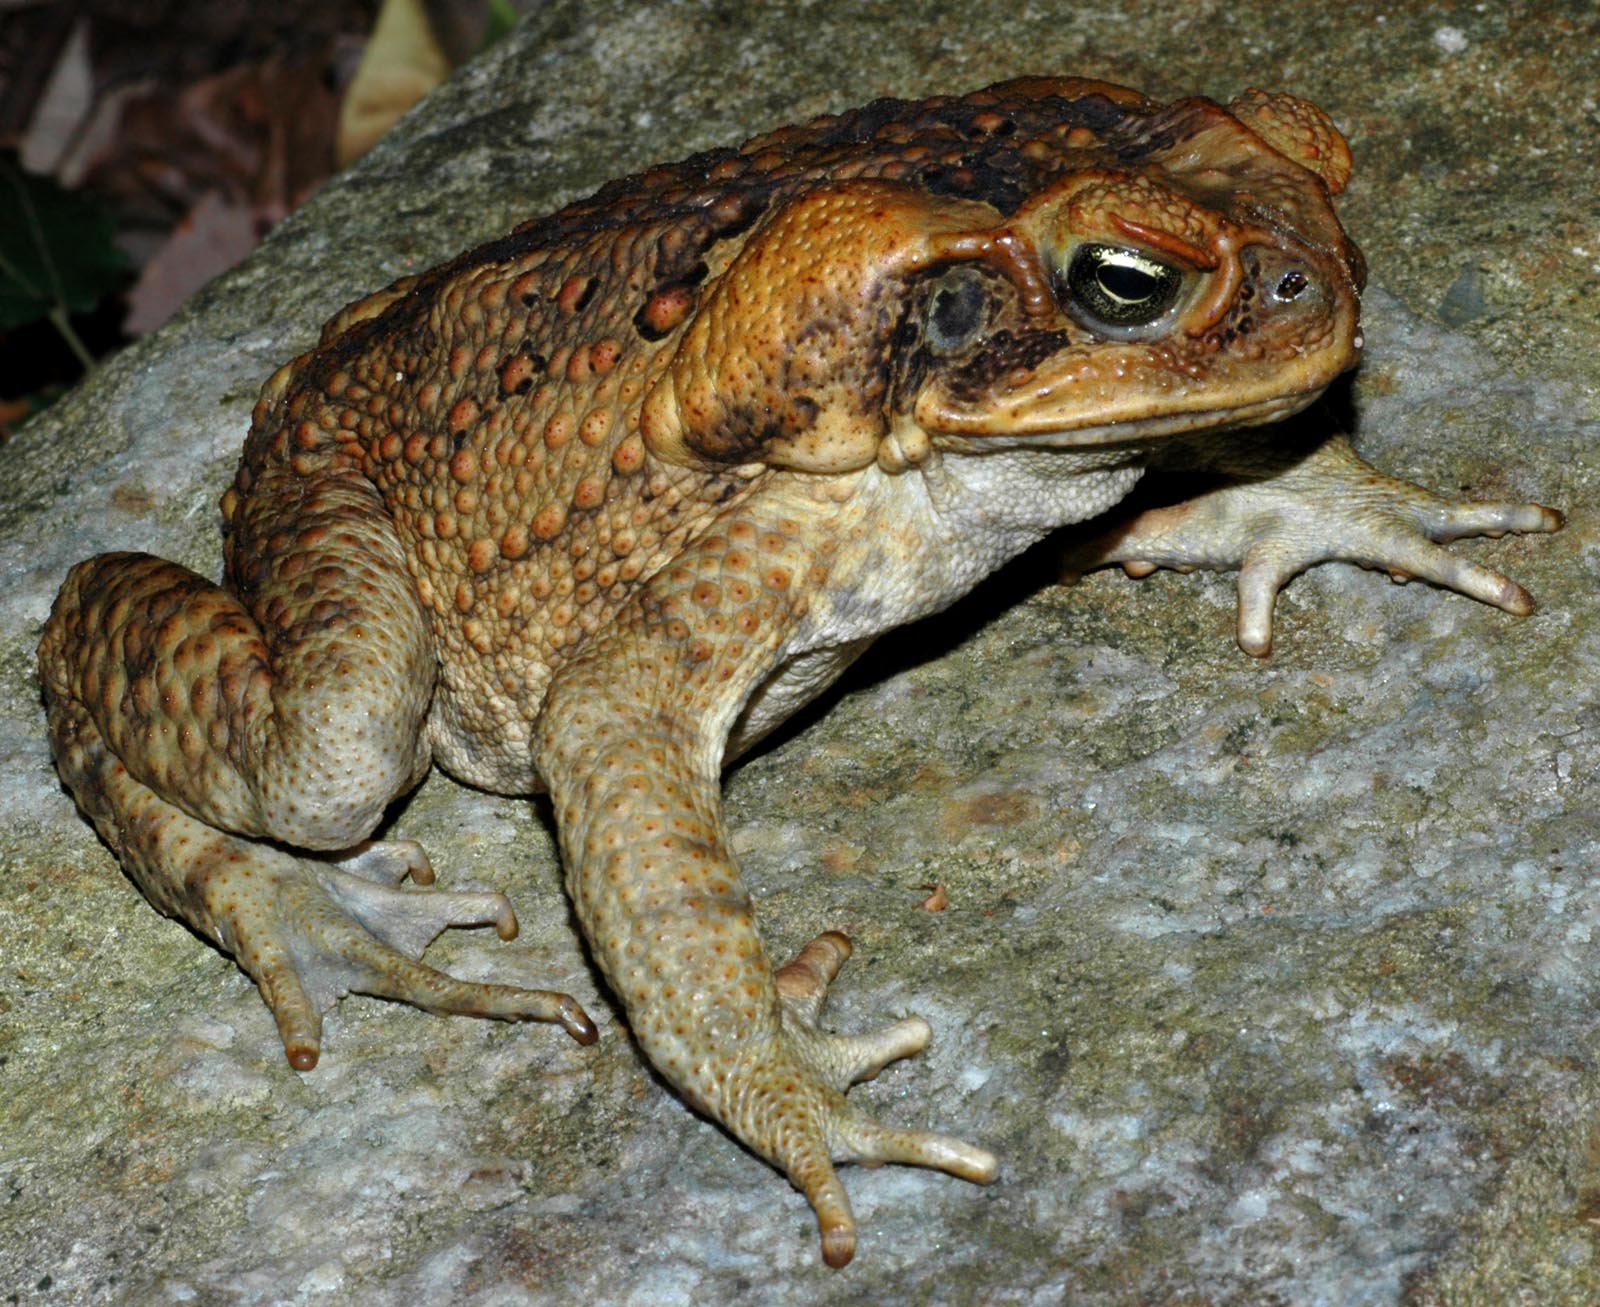 Cane Toad #6